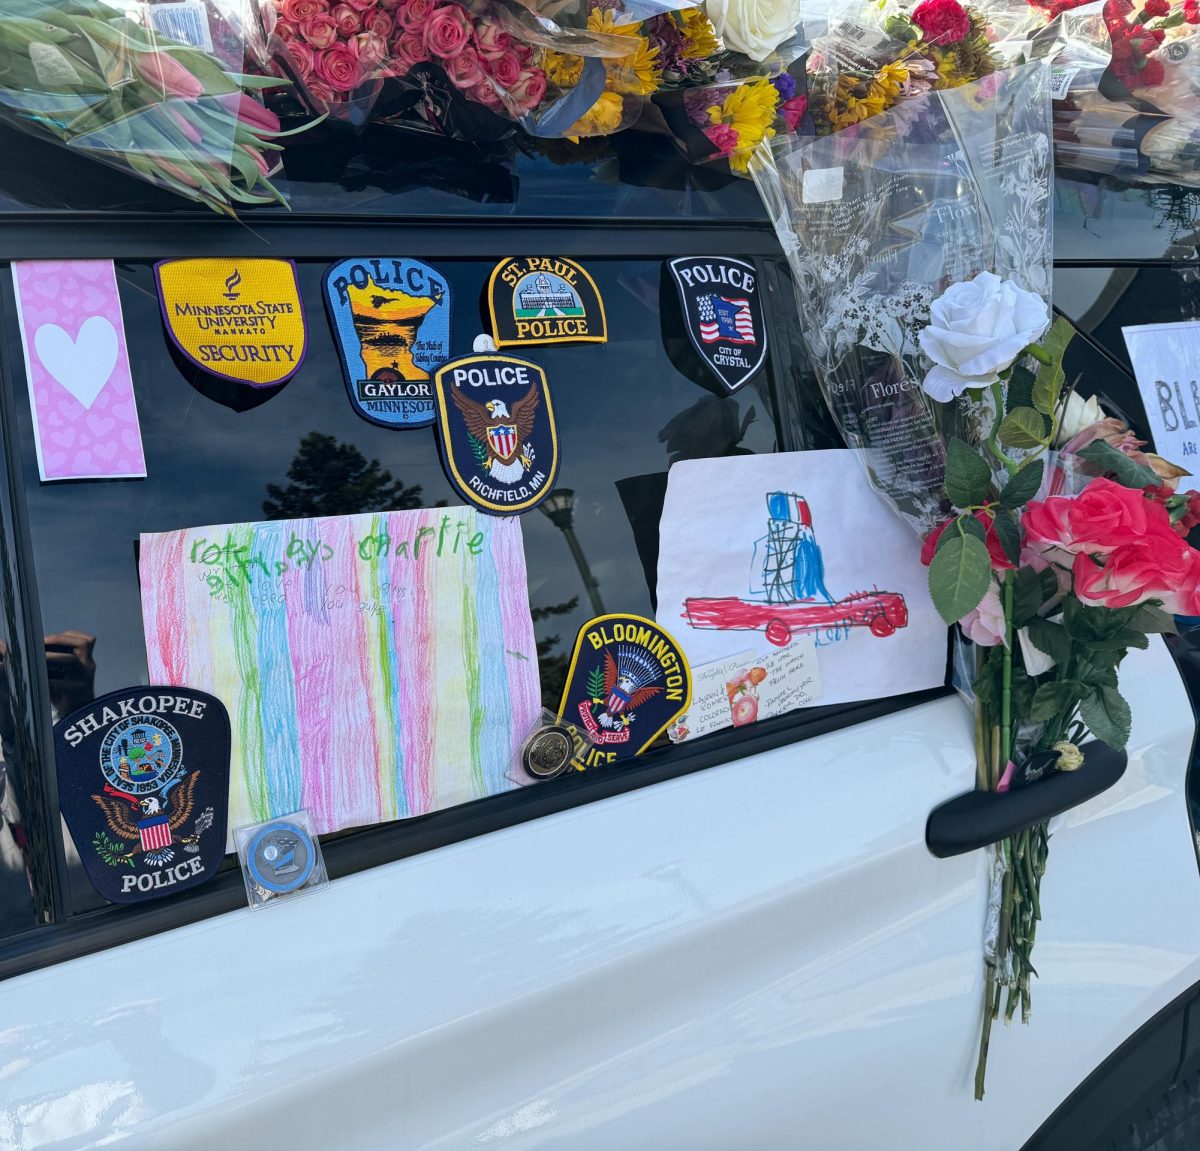 SOLIDARITY. On the car, badges from police departments from various cities throughout the state show the widespread support.